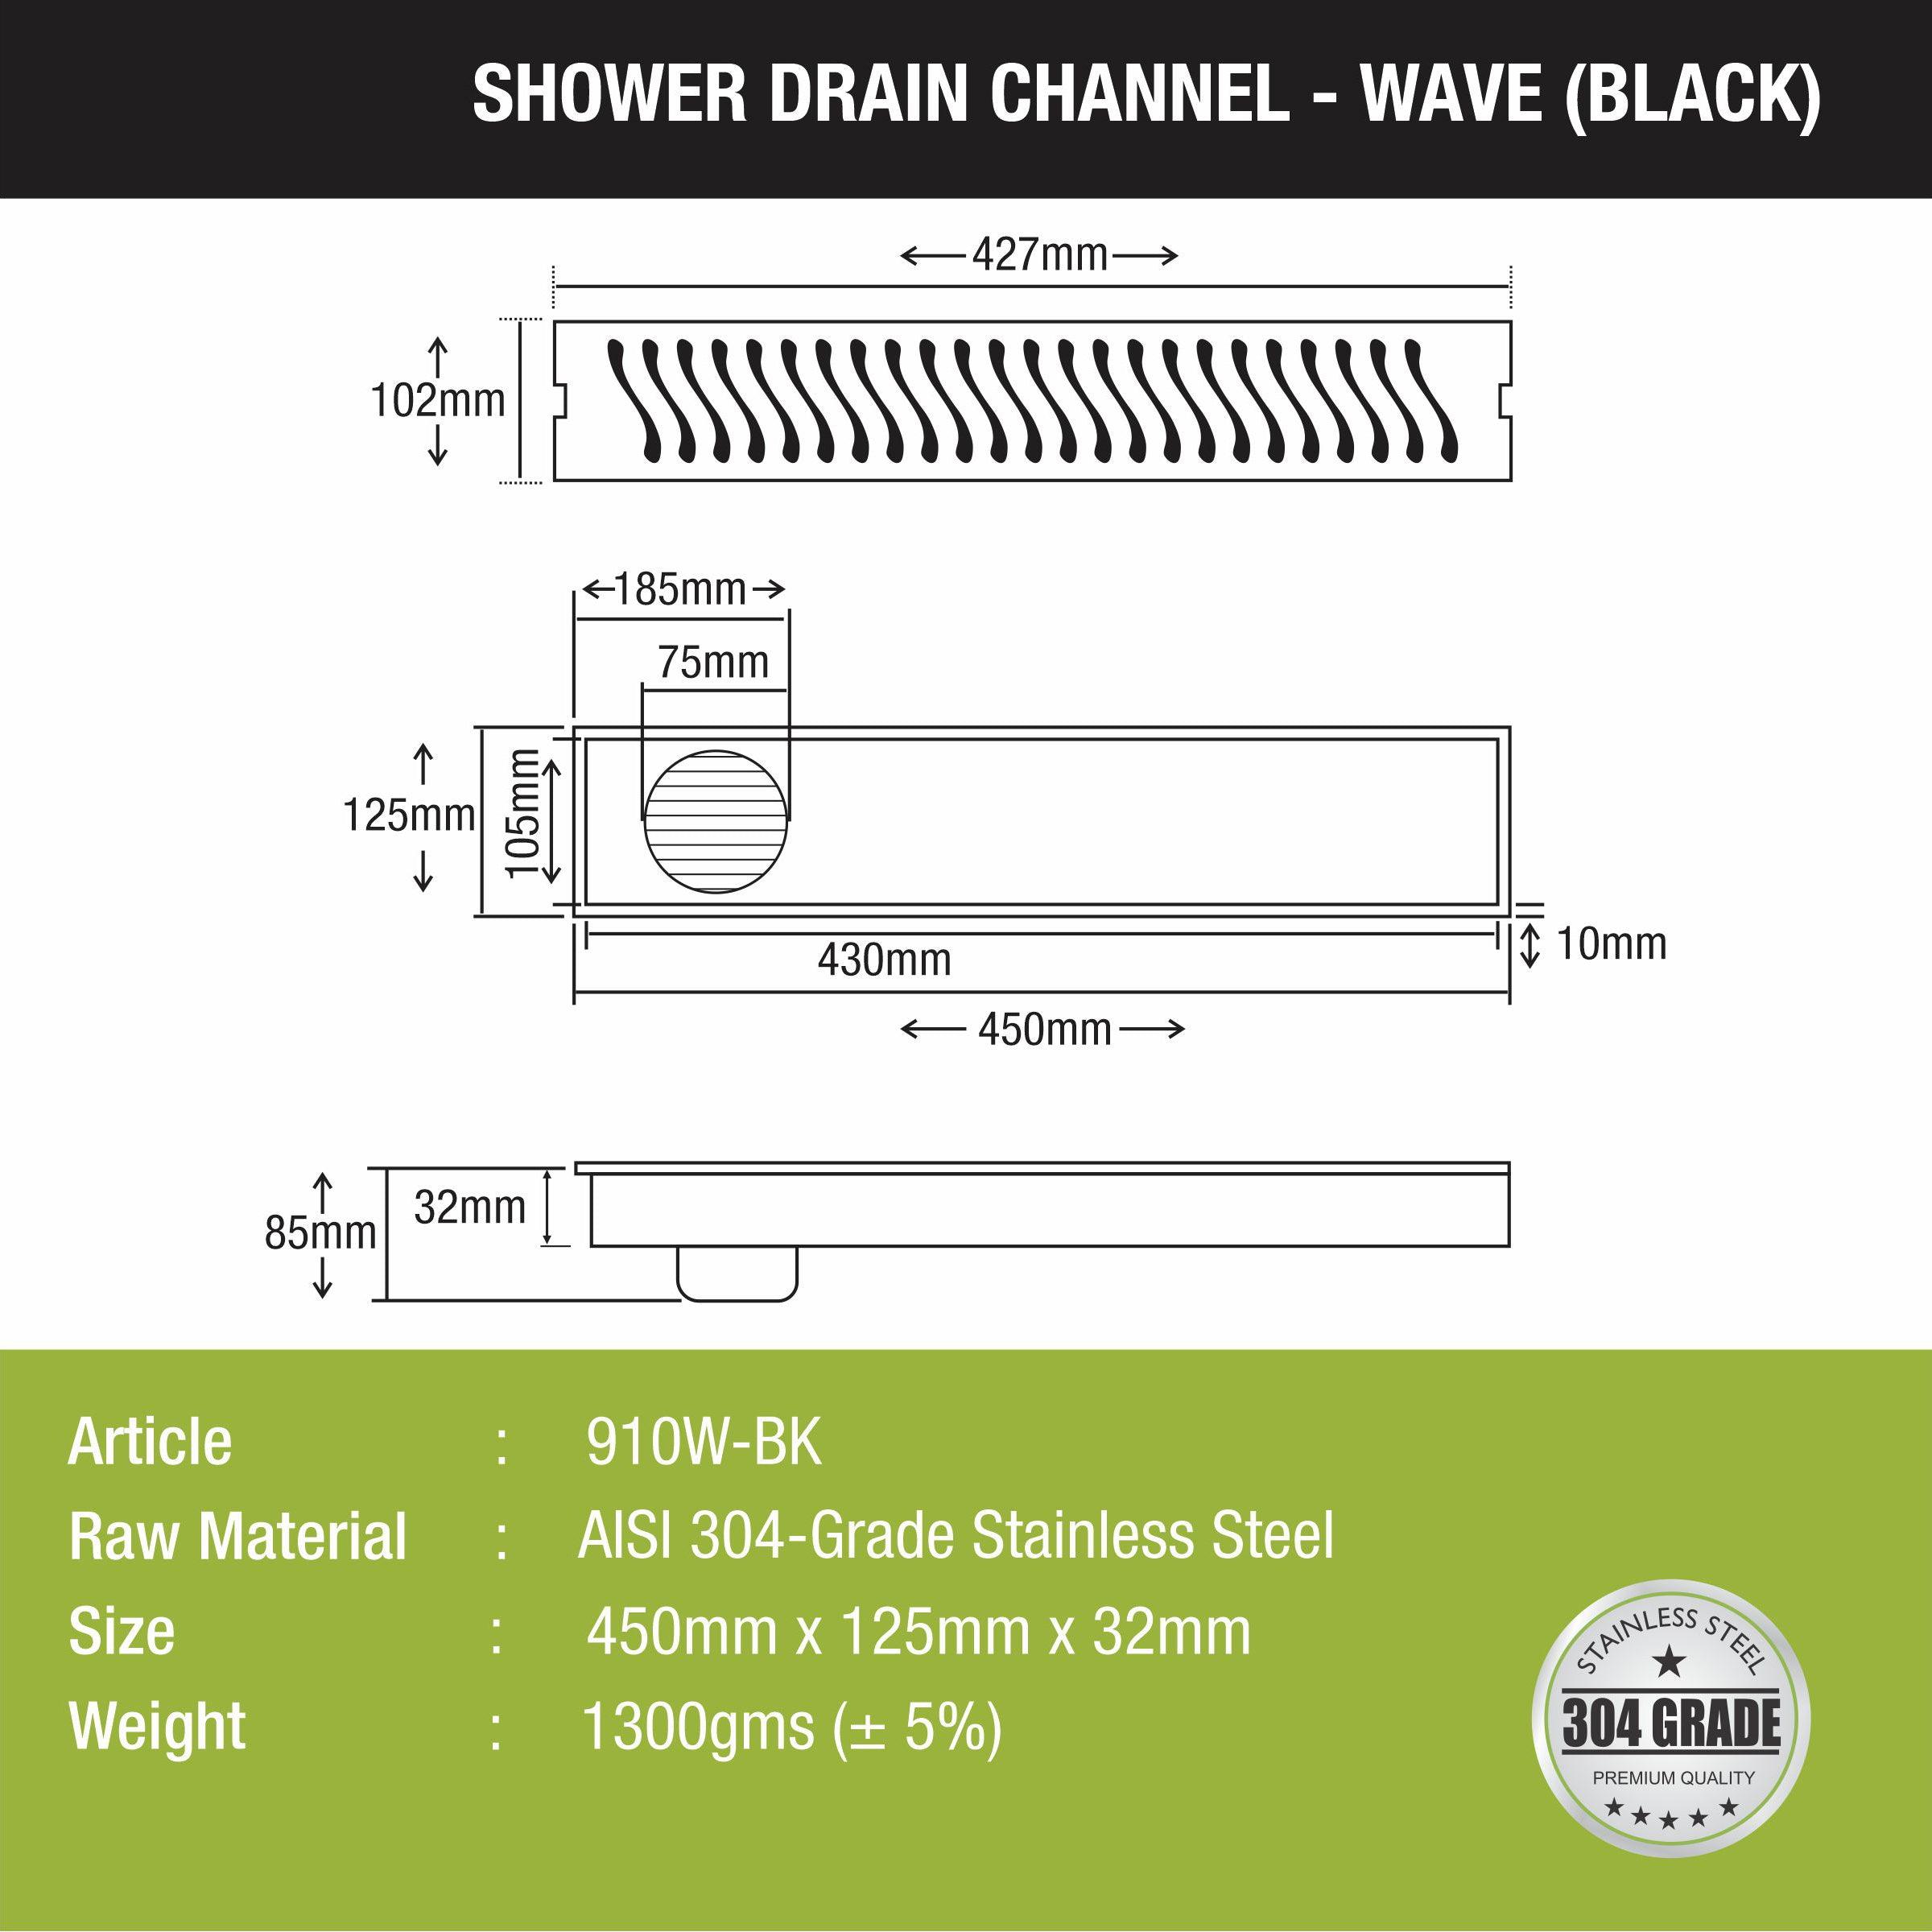 Wave Shower Drain Channel - Black (18 x 4 Inches) size and measurement